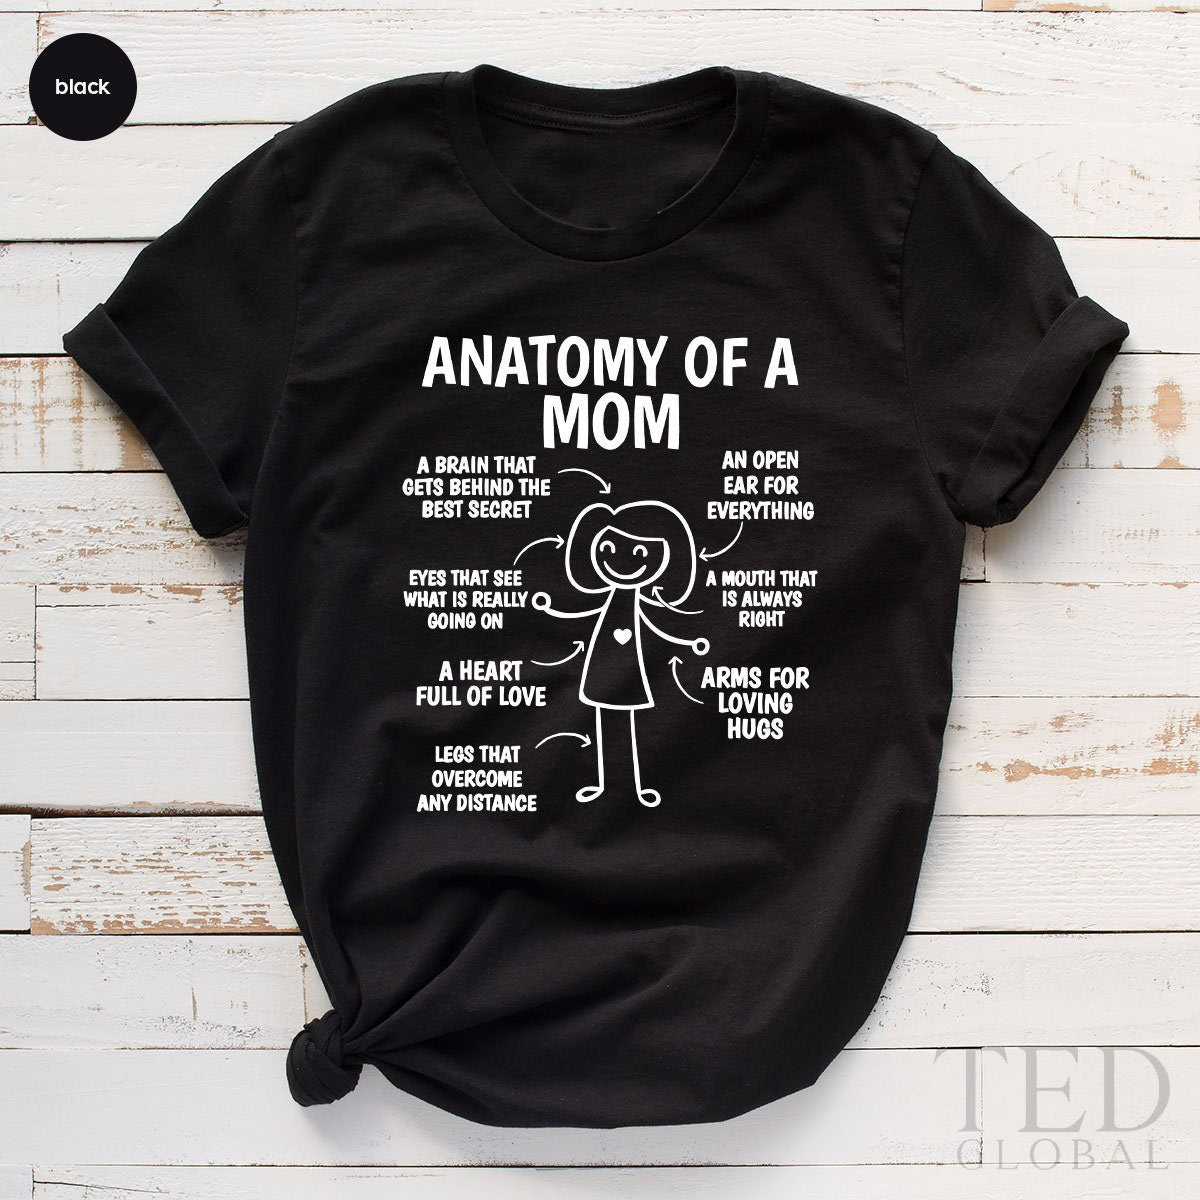 Funny Mom T Shirt, Meaningful Gift For Mother, Anatomy Of A Mom Shirt, Mom Birthday Gift, Cute Mother Shirt From Kids, Motherhoods TShirt - Fastdeliverytees.com